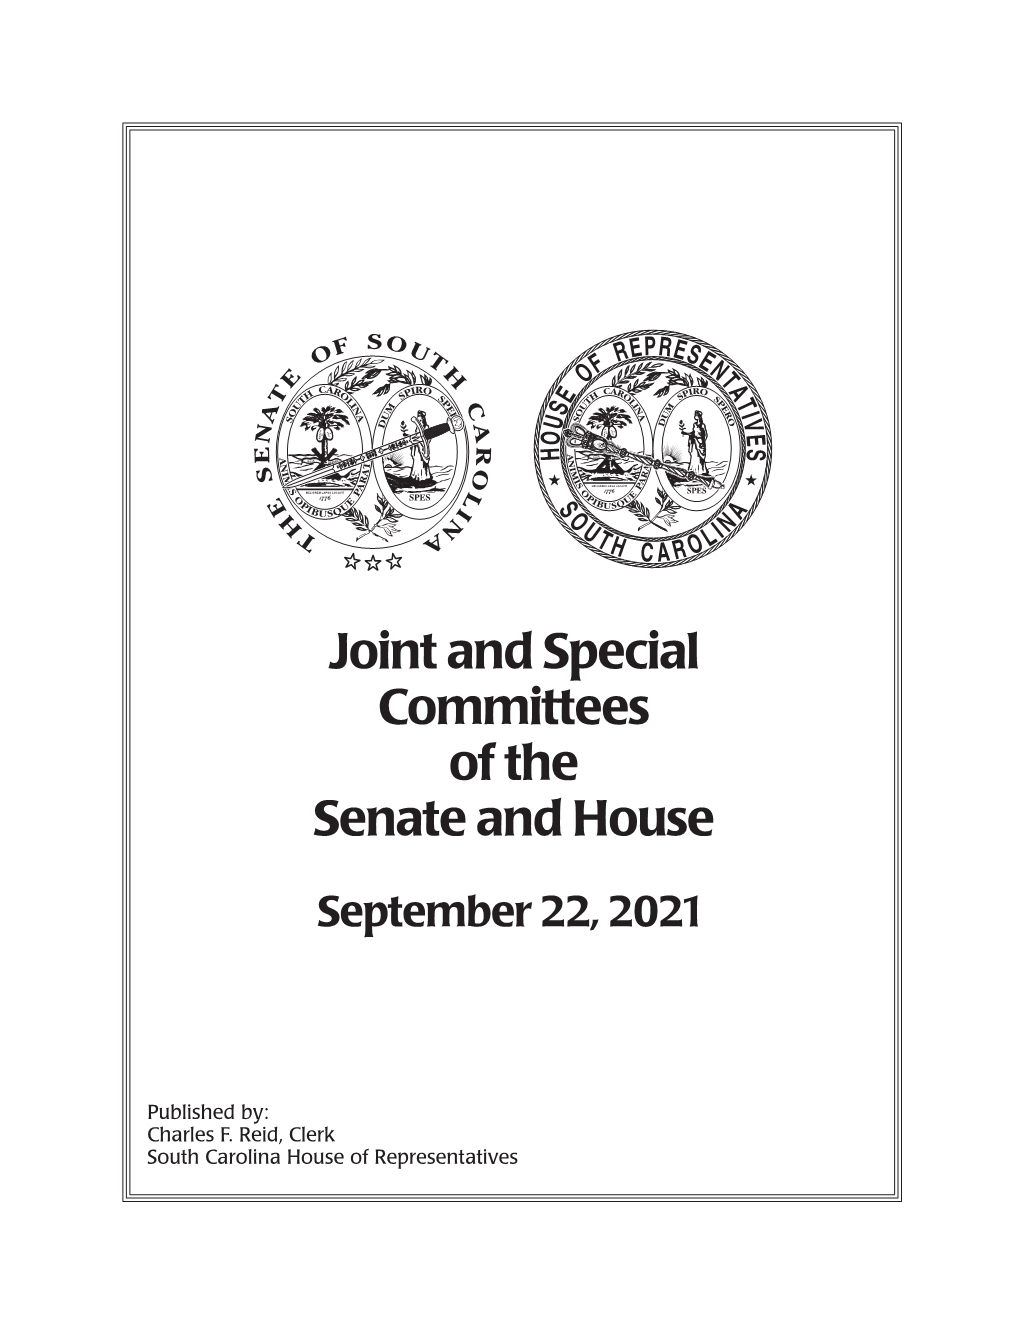 Joint and Special Committees of the Senate and House